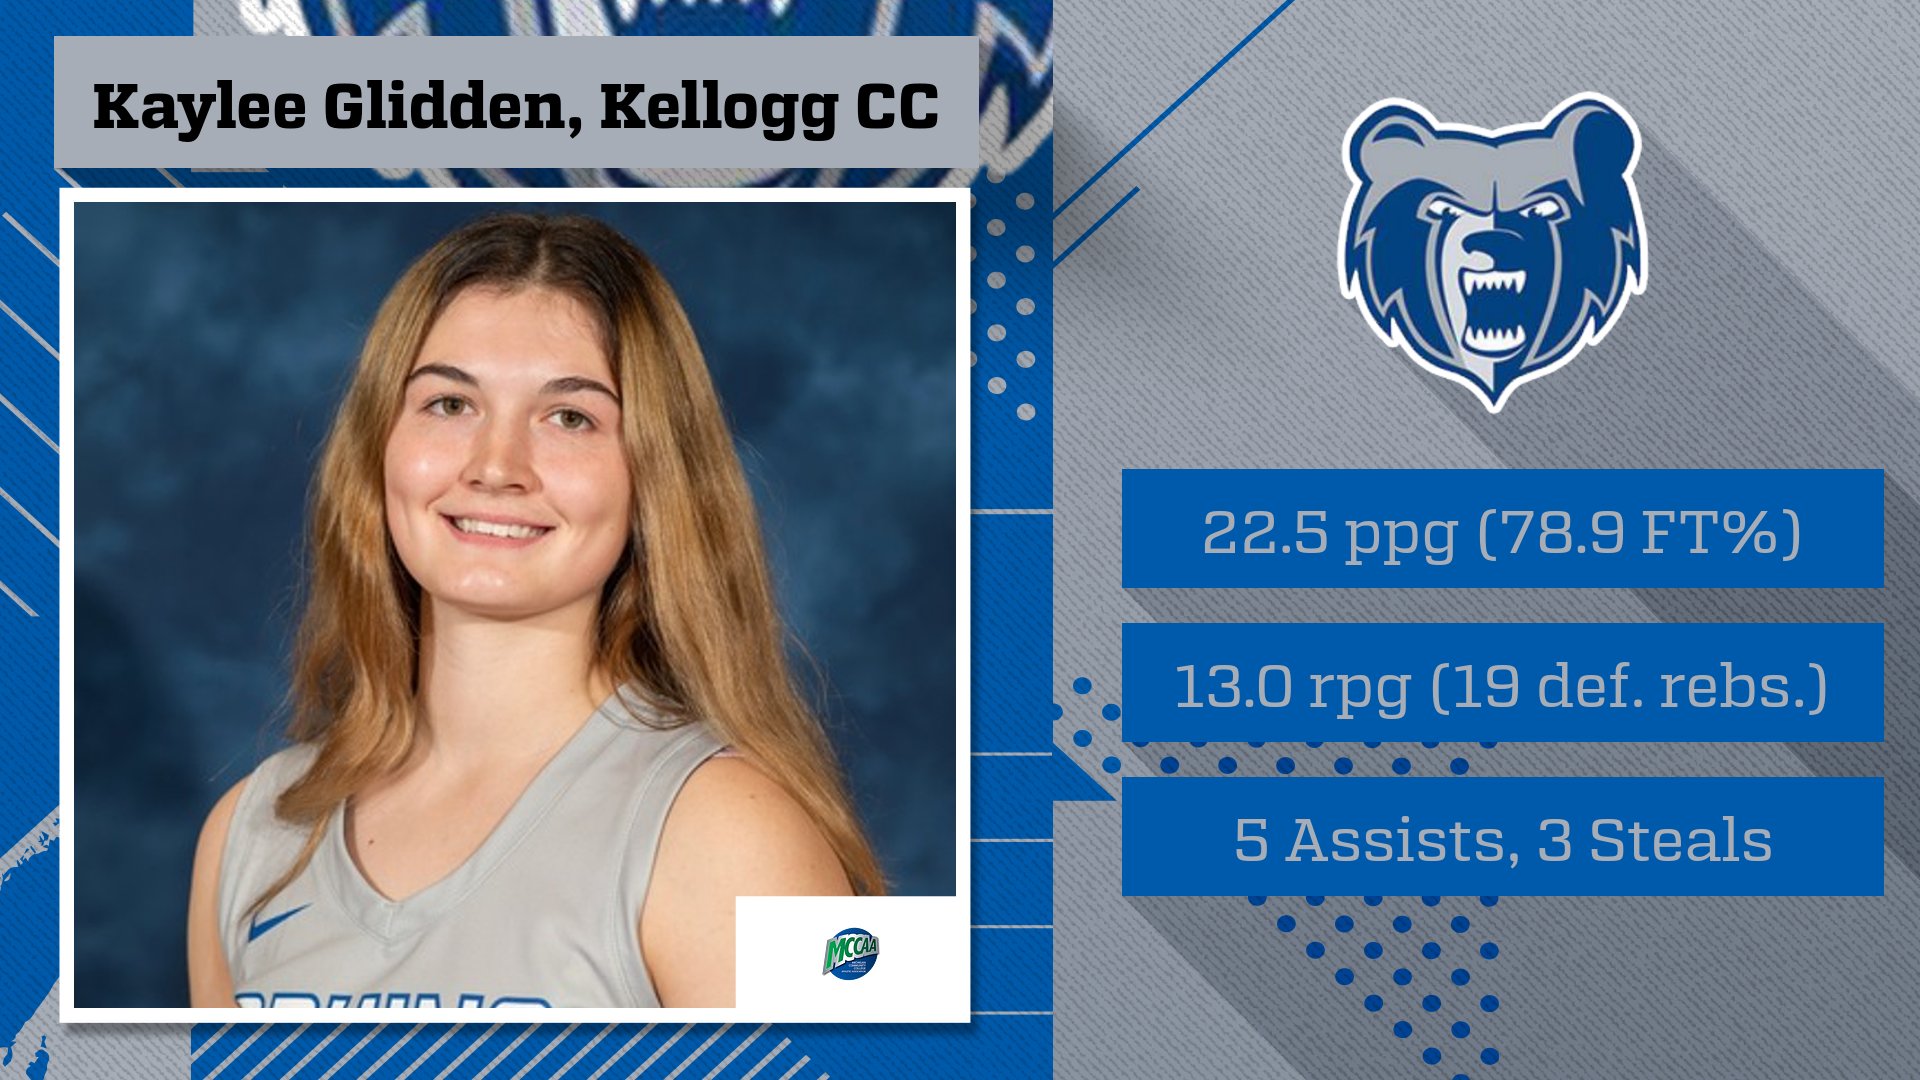 Bruins' Glidden is a Three-Time MCCAA Western Conference Women's Basketball Player of the Week Honoree